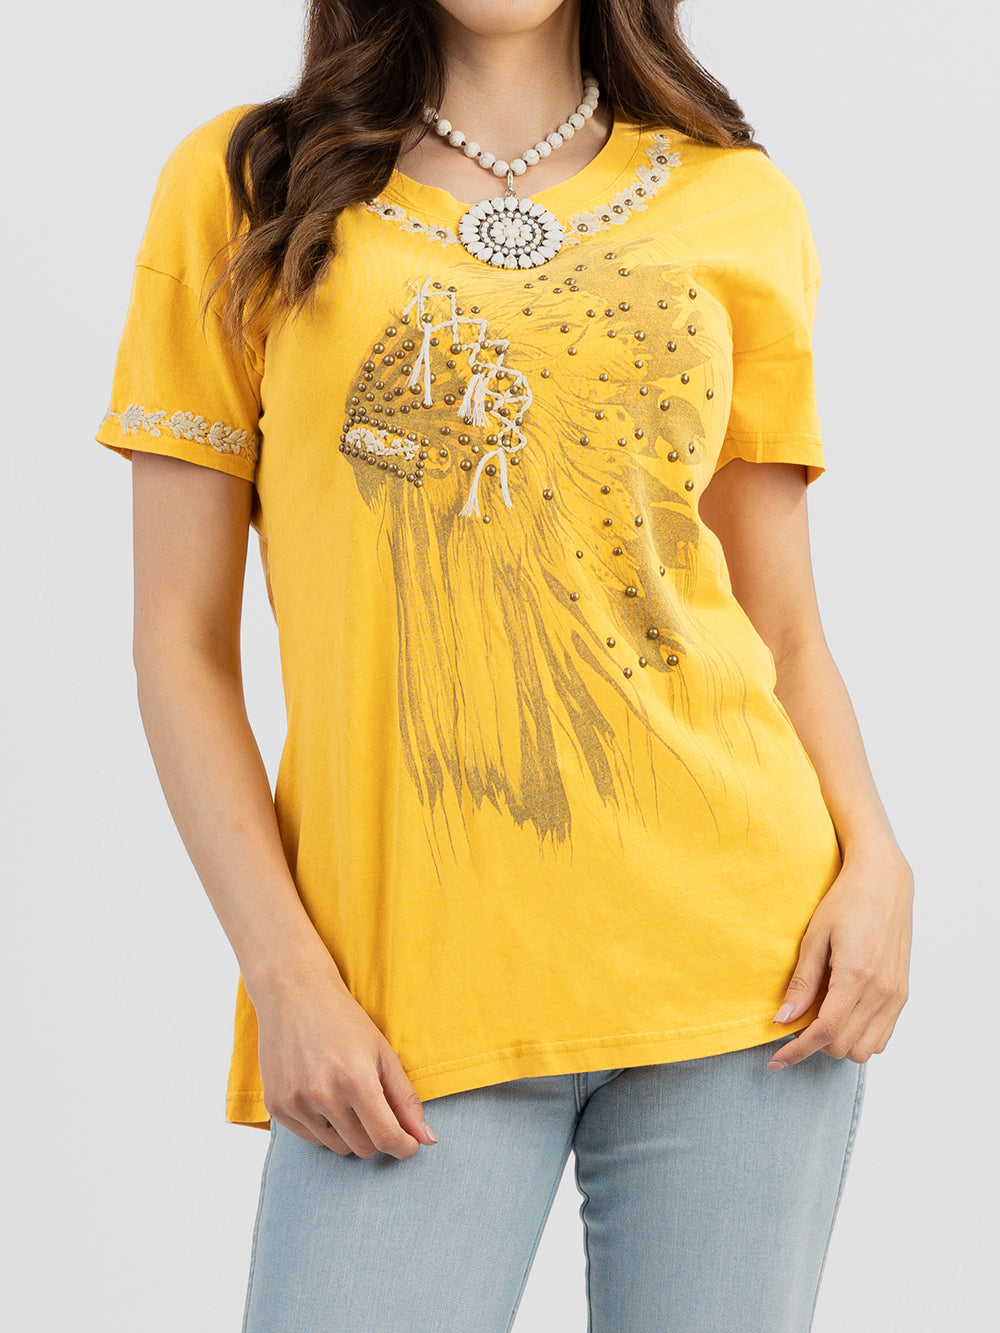 Women's Mineral Wash “Tribe” Short Sleeve Tee - Cowgirl Wear